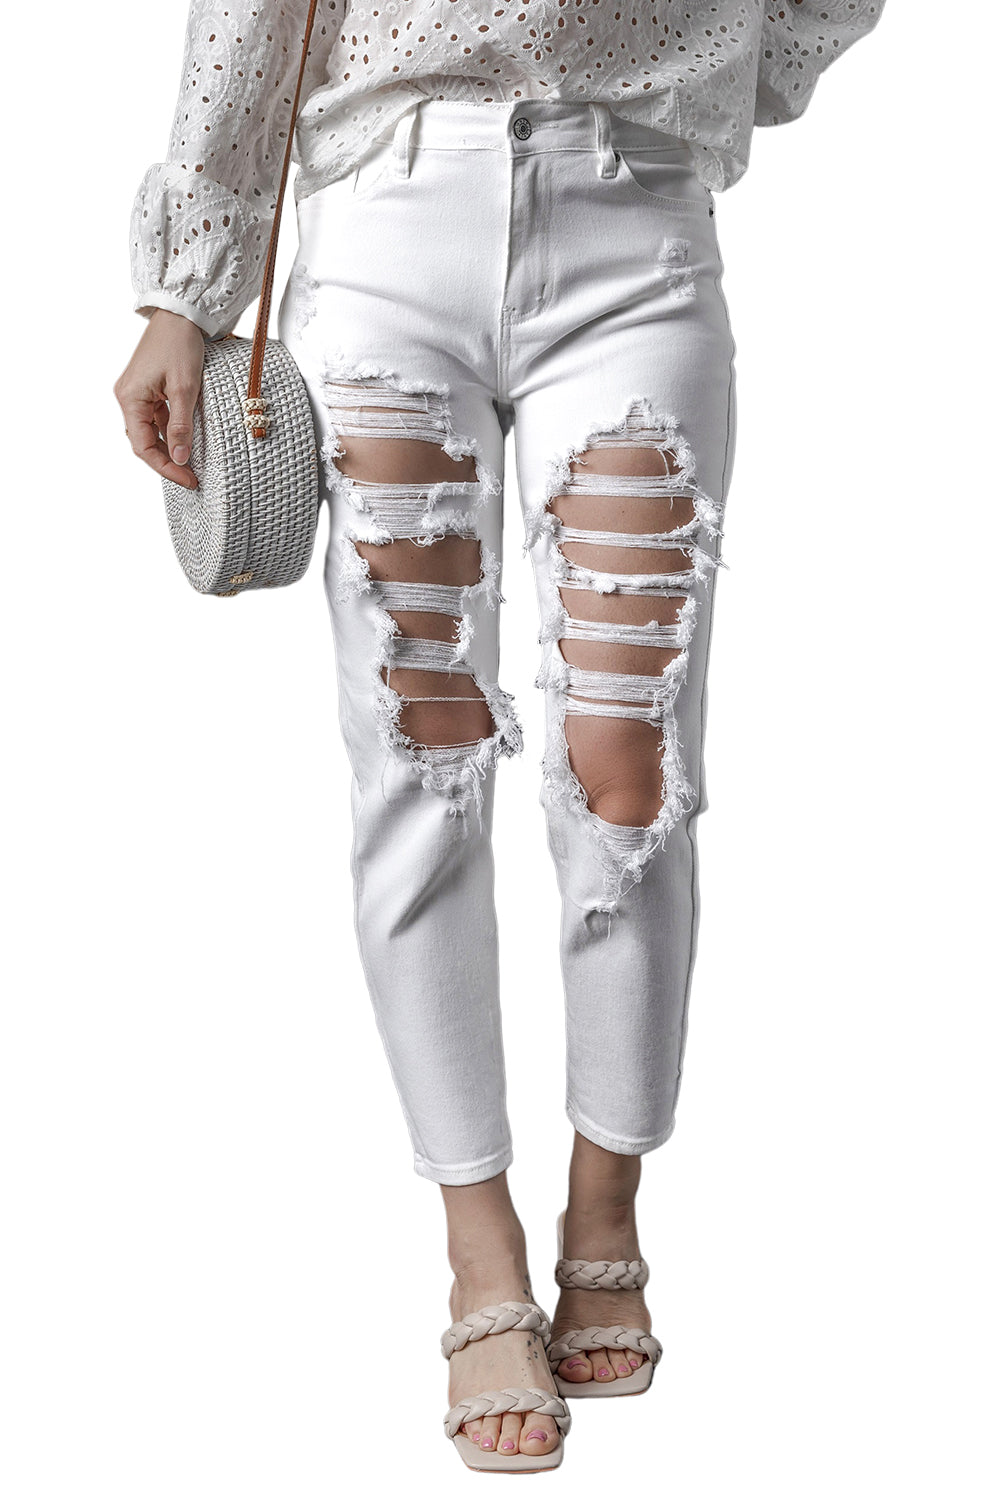 White Distressed Ripped Holes High Waist Skinny Jeans